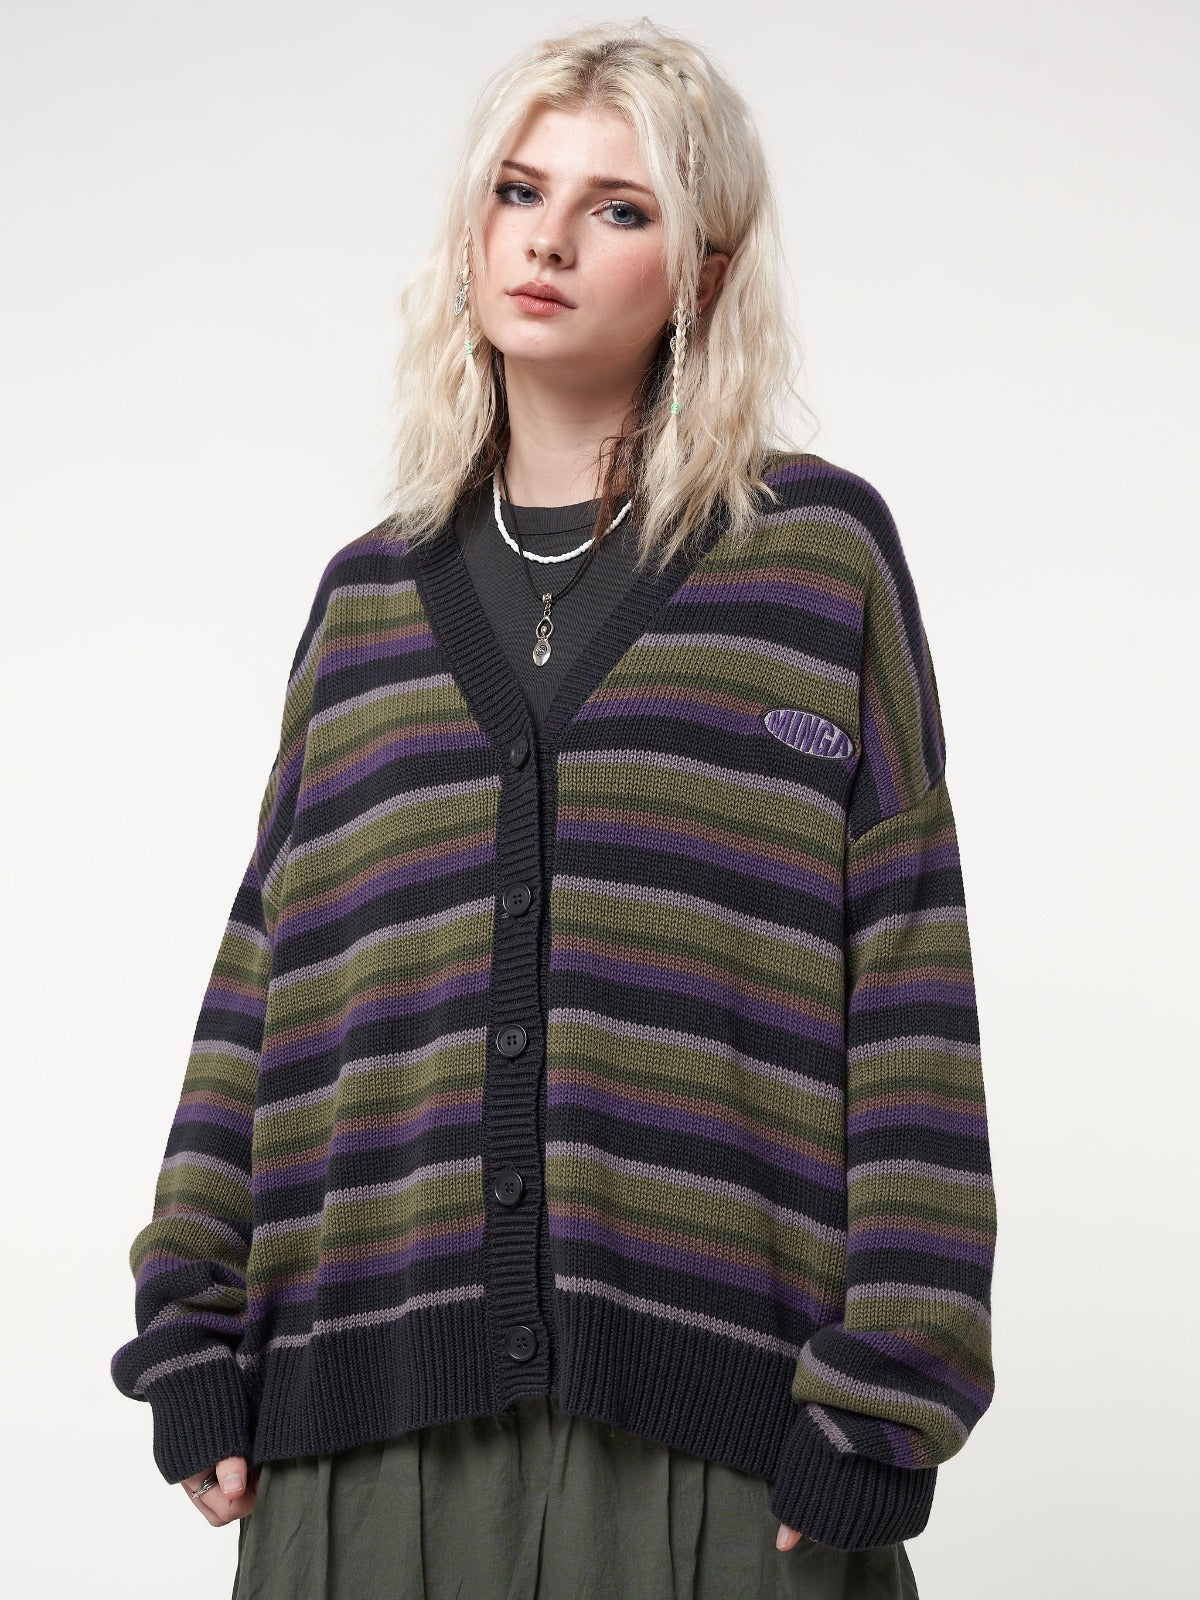 Knitted cardigan with stripes in purple, grey, green and black